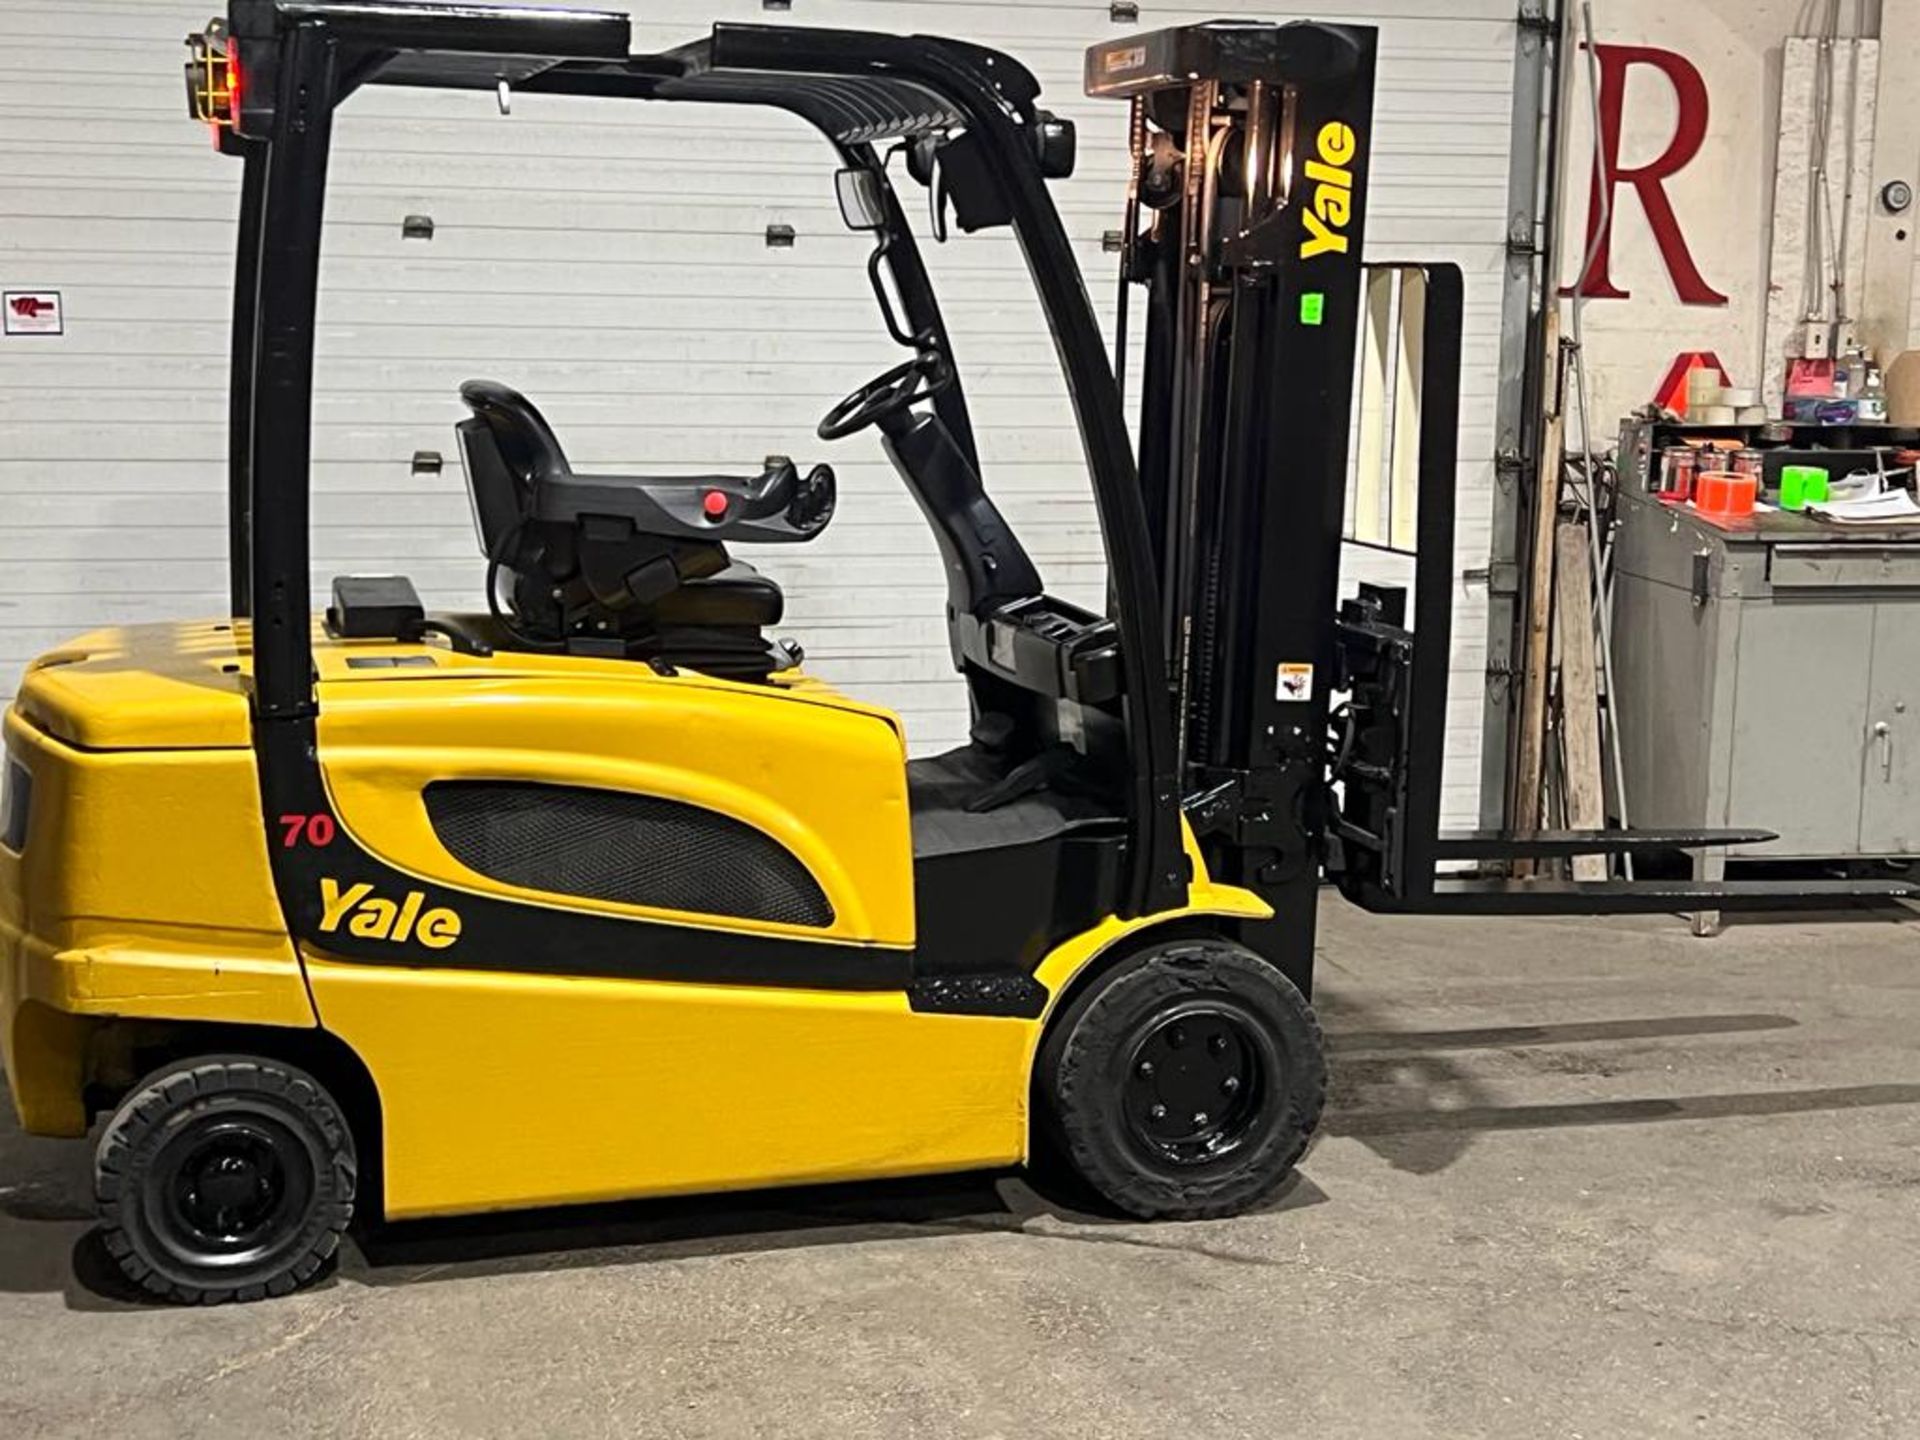 MINT 2019 Yale 7,000lbs Capacity Forklift INDOOR / OUTDOOR Electric 80V with Sideshift & Fork